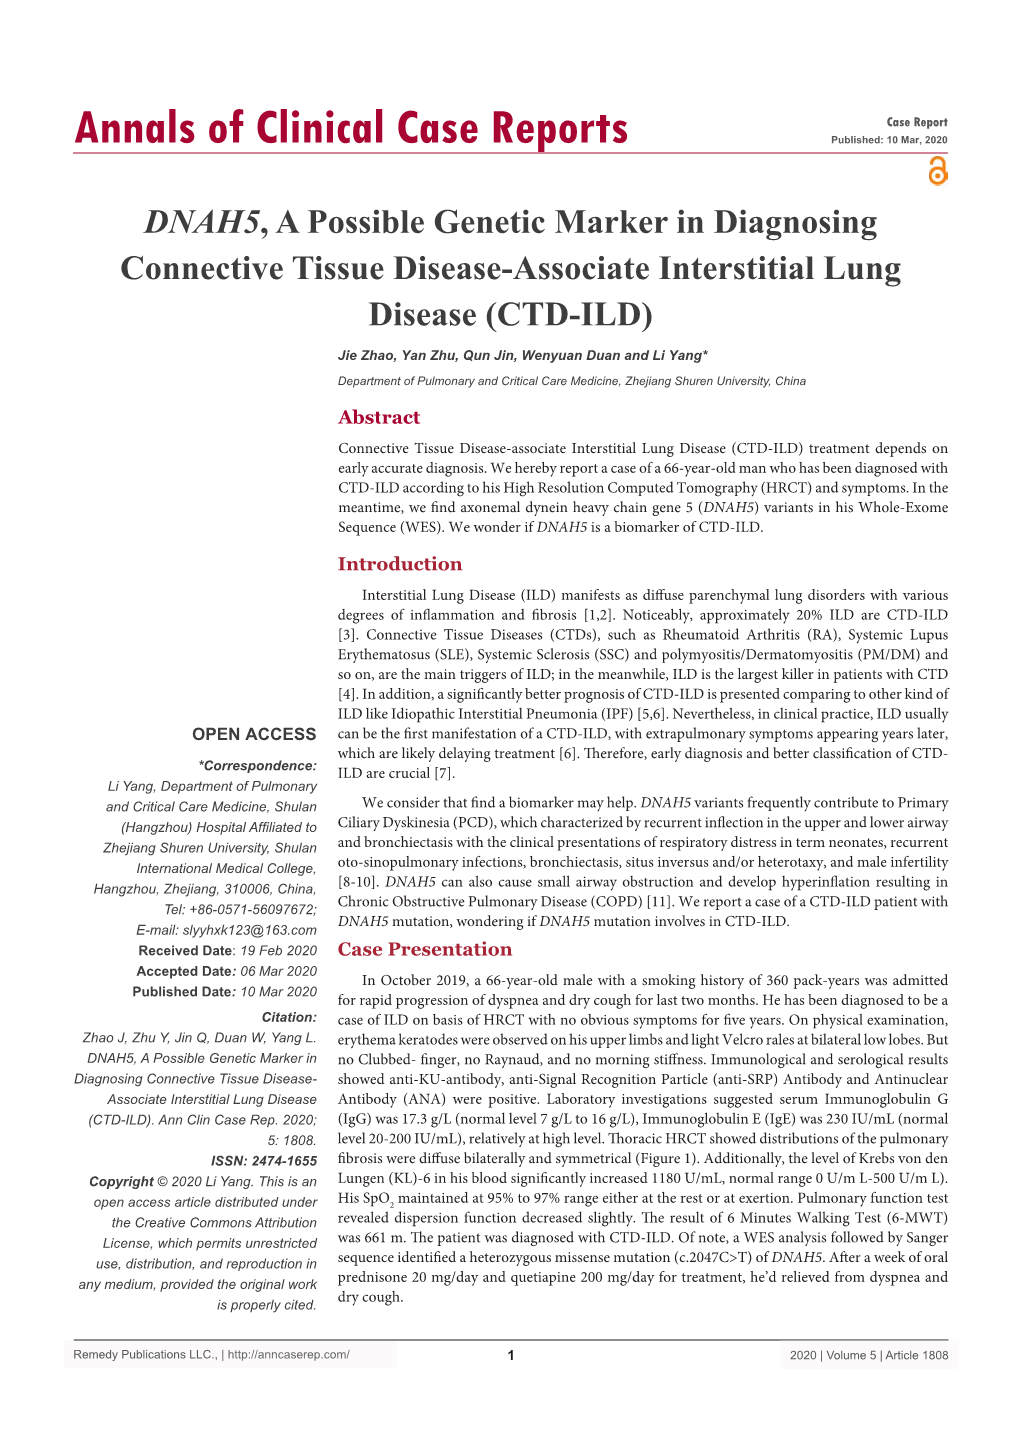 DNAH5, a Possible Genetic Marker in Diagnosing Connective Tissue Disease-Associate Interstitial Lung Disease (CTD-ILD)